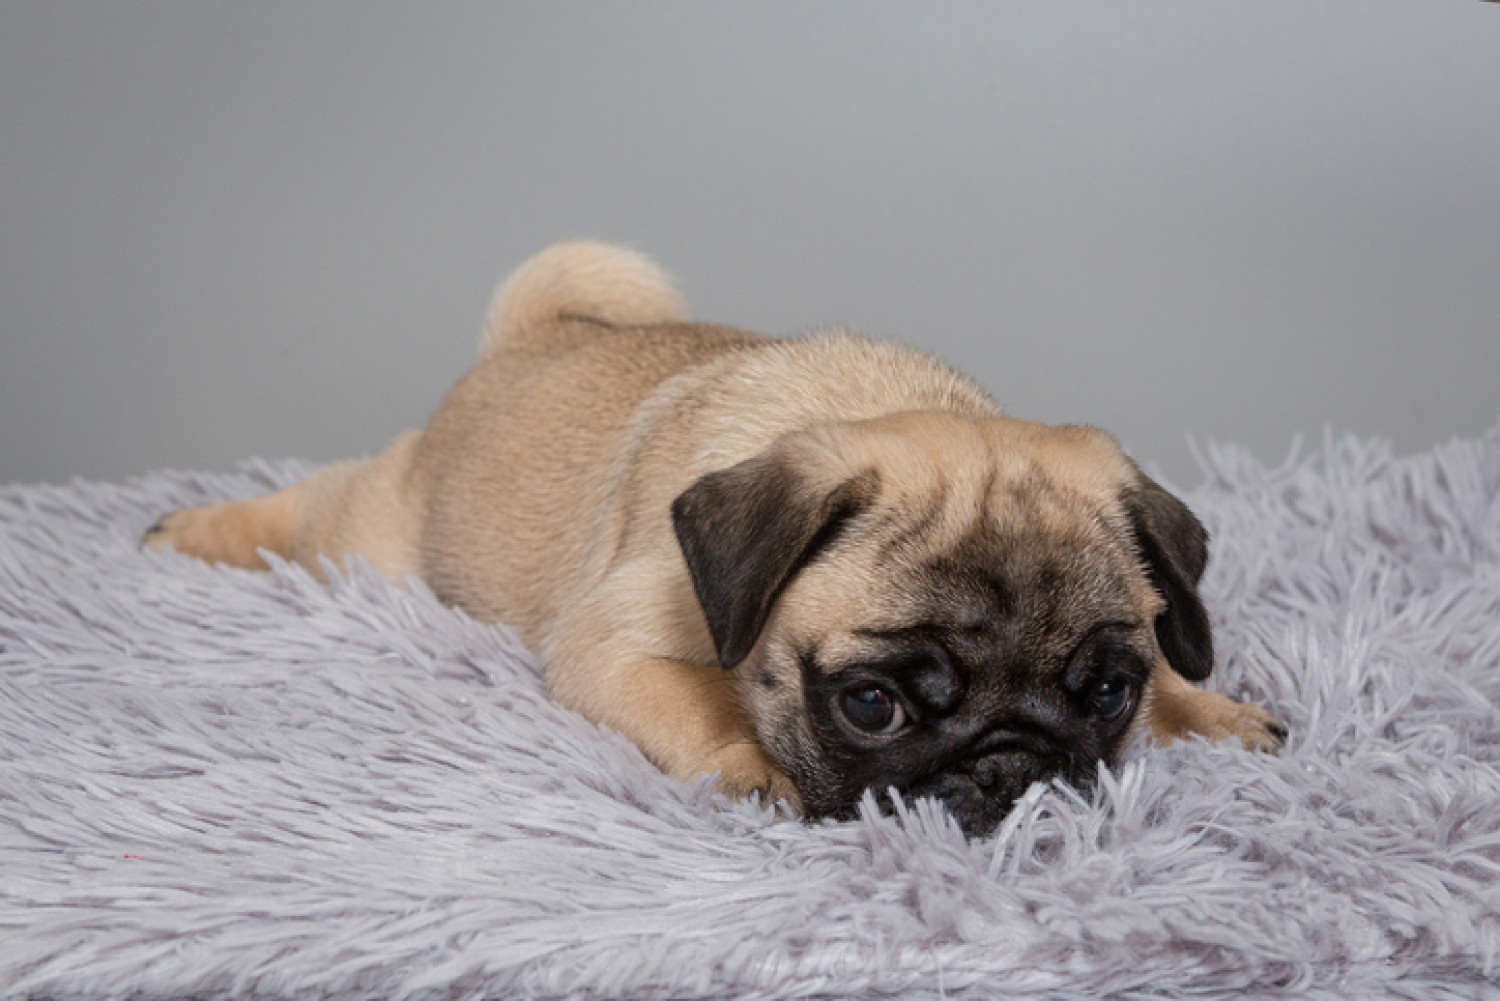 A cute Pug puppy reclines on a soft grey blanket, demonstrating the breed's playful yet comforting presence for dementia support at home.